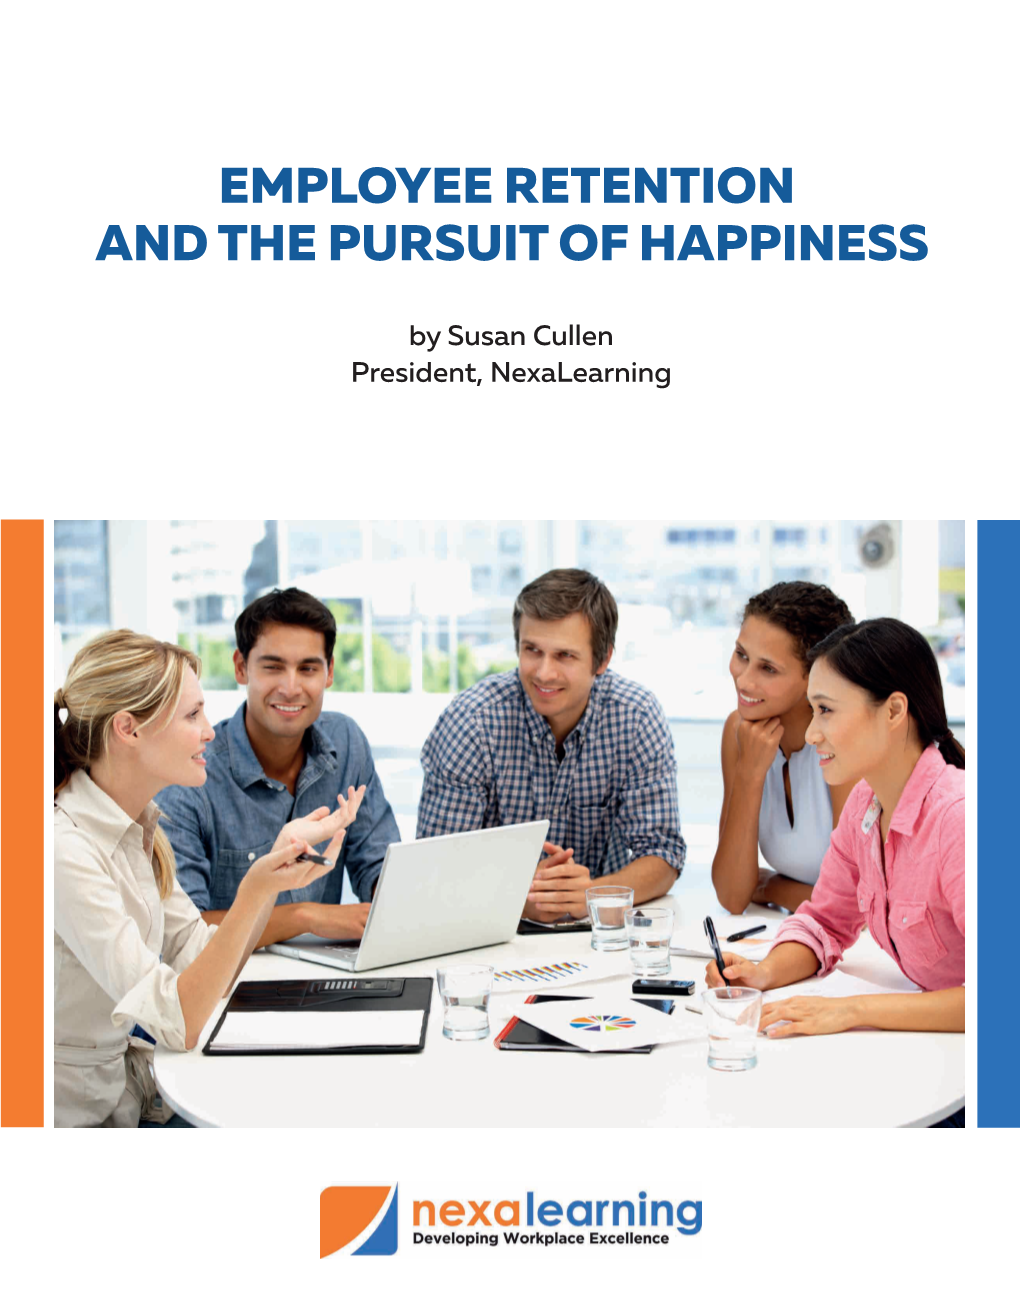 Employee Retention and the Pursuit of Happiness